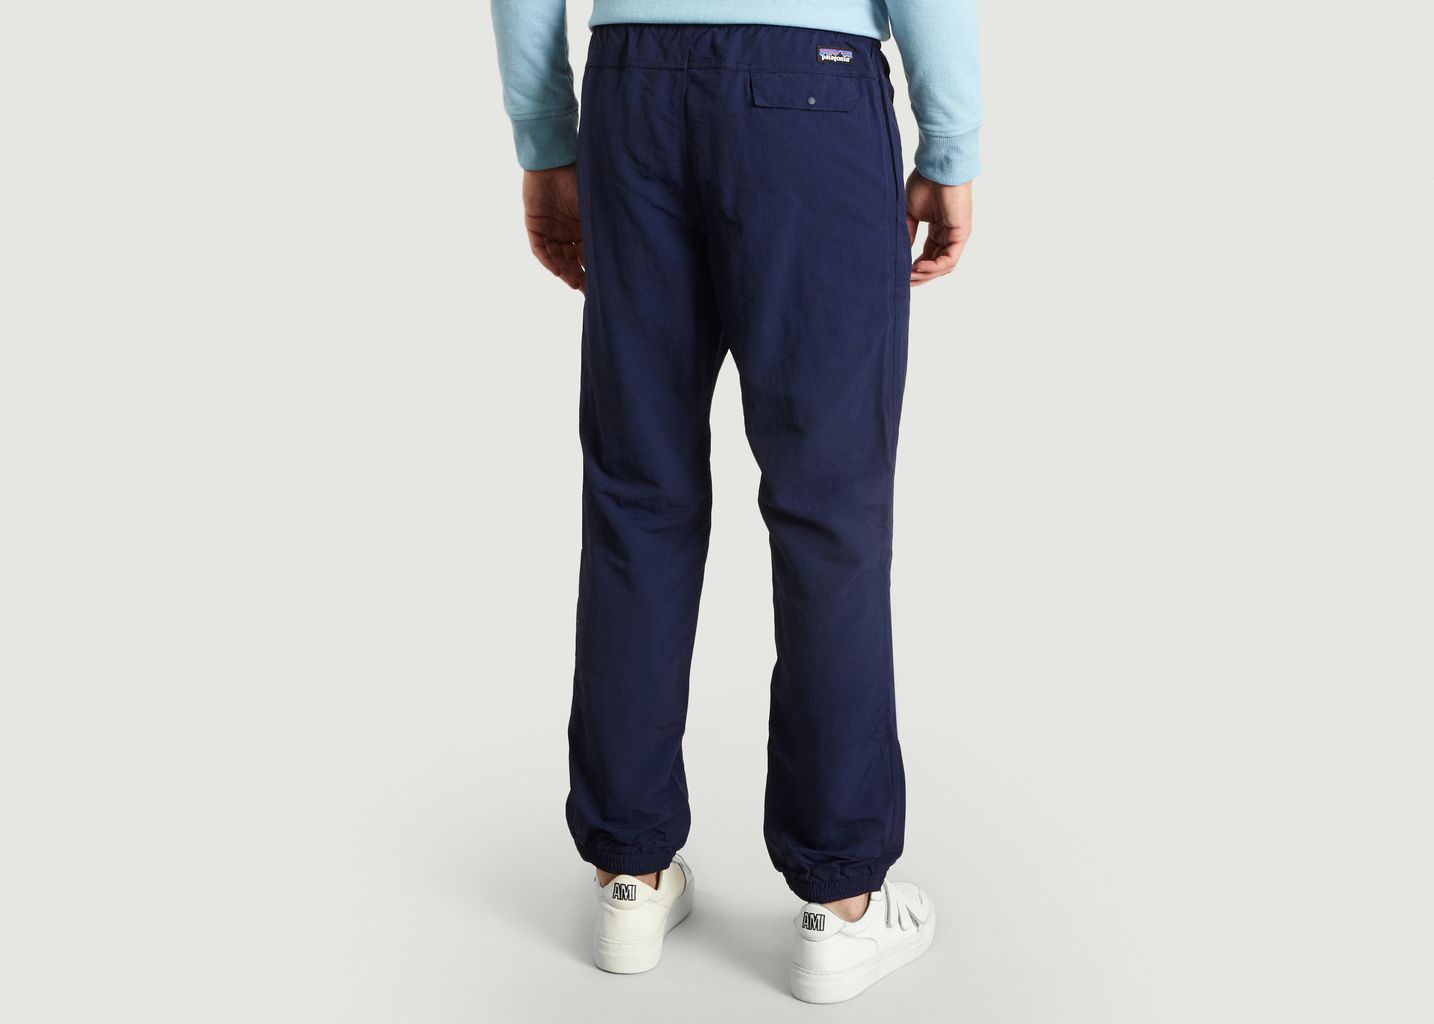 Patagonia Field Pants - Breathable Fishing Trousers